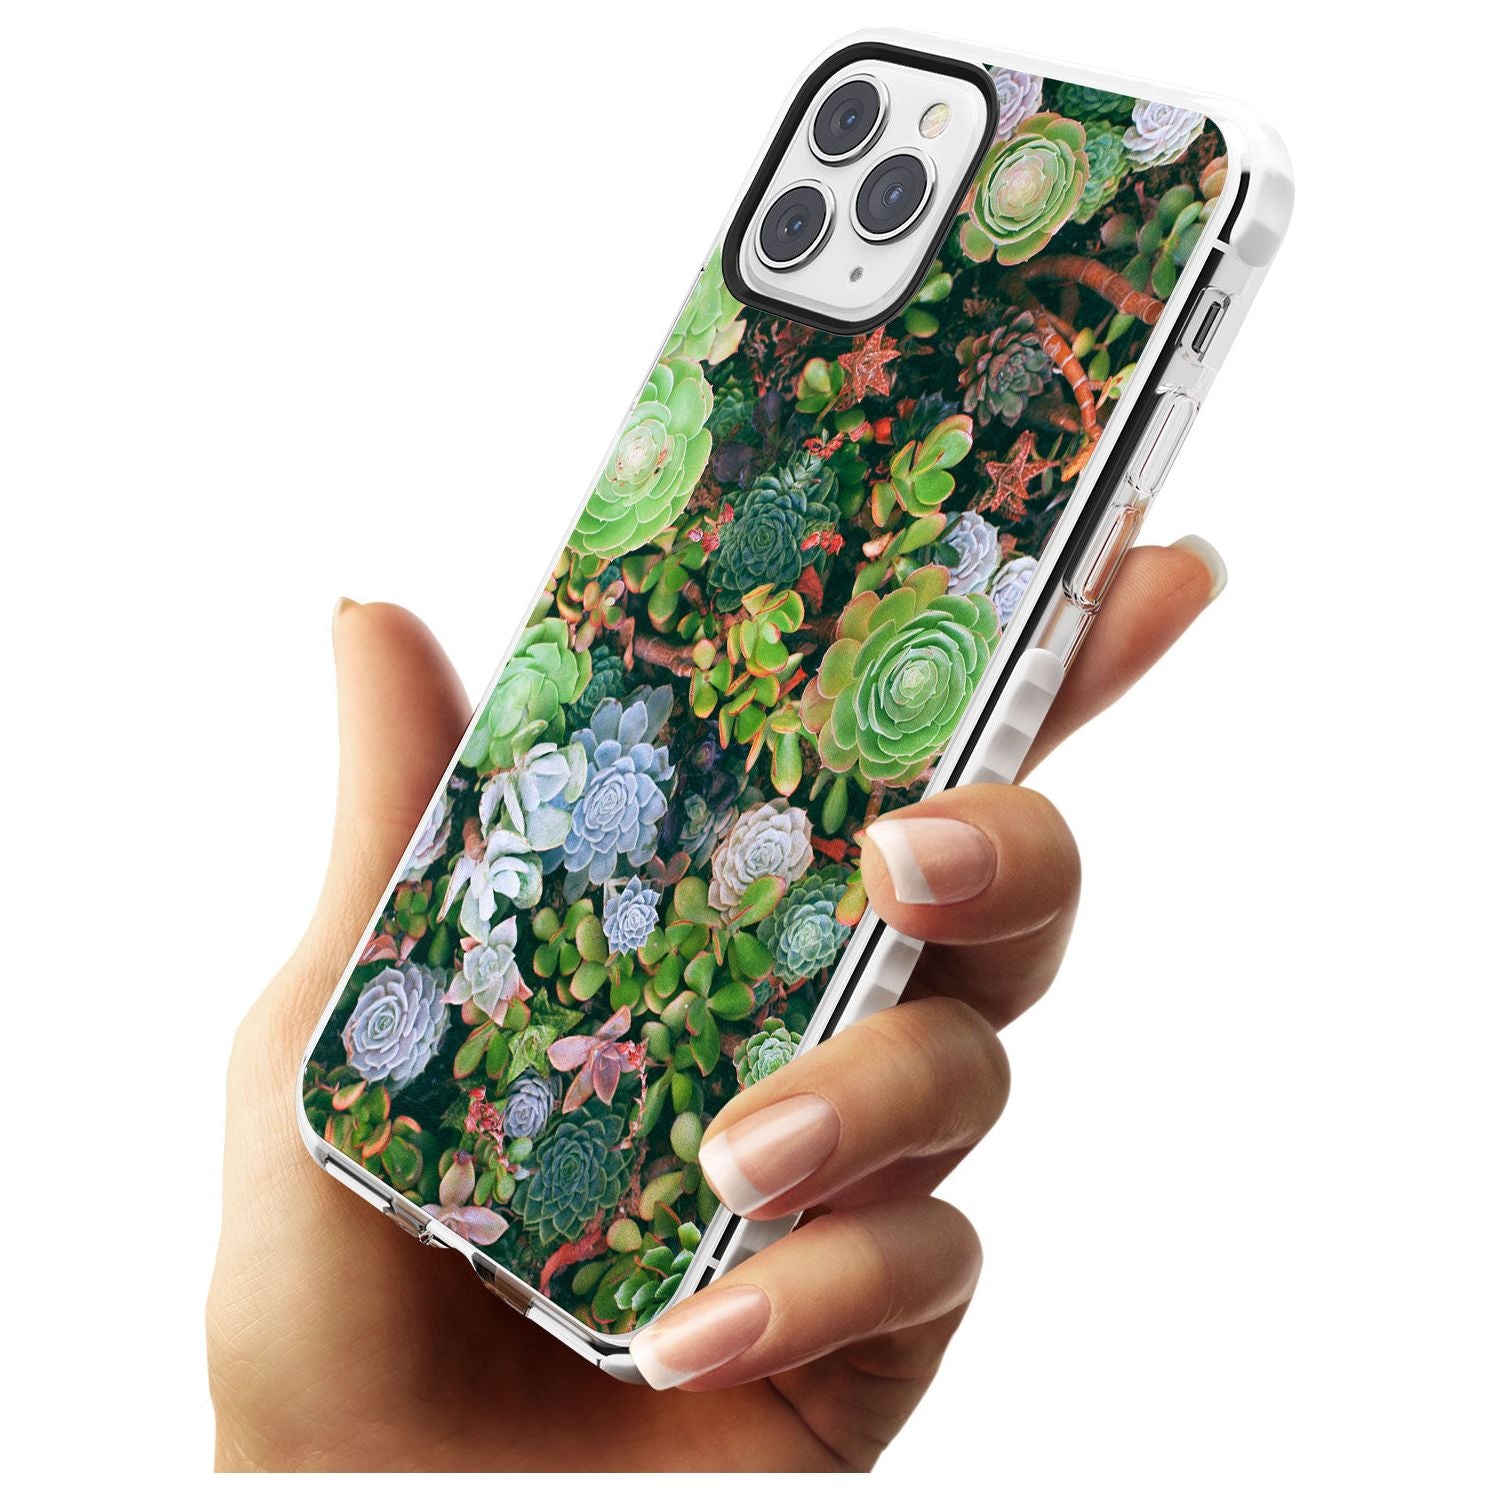 Colourful Succulents Photograph Impact Phone Case for iPhone 11 Pro Max